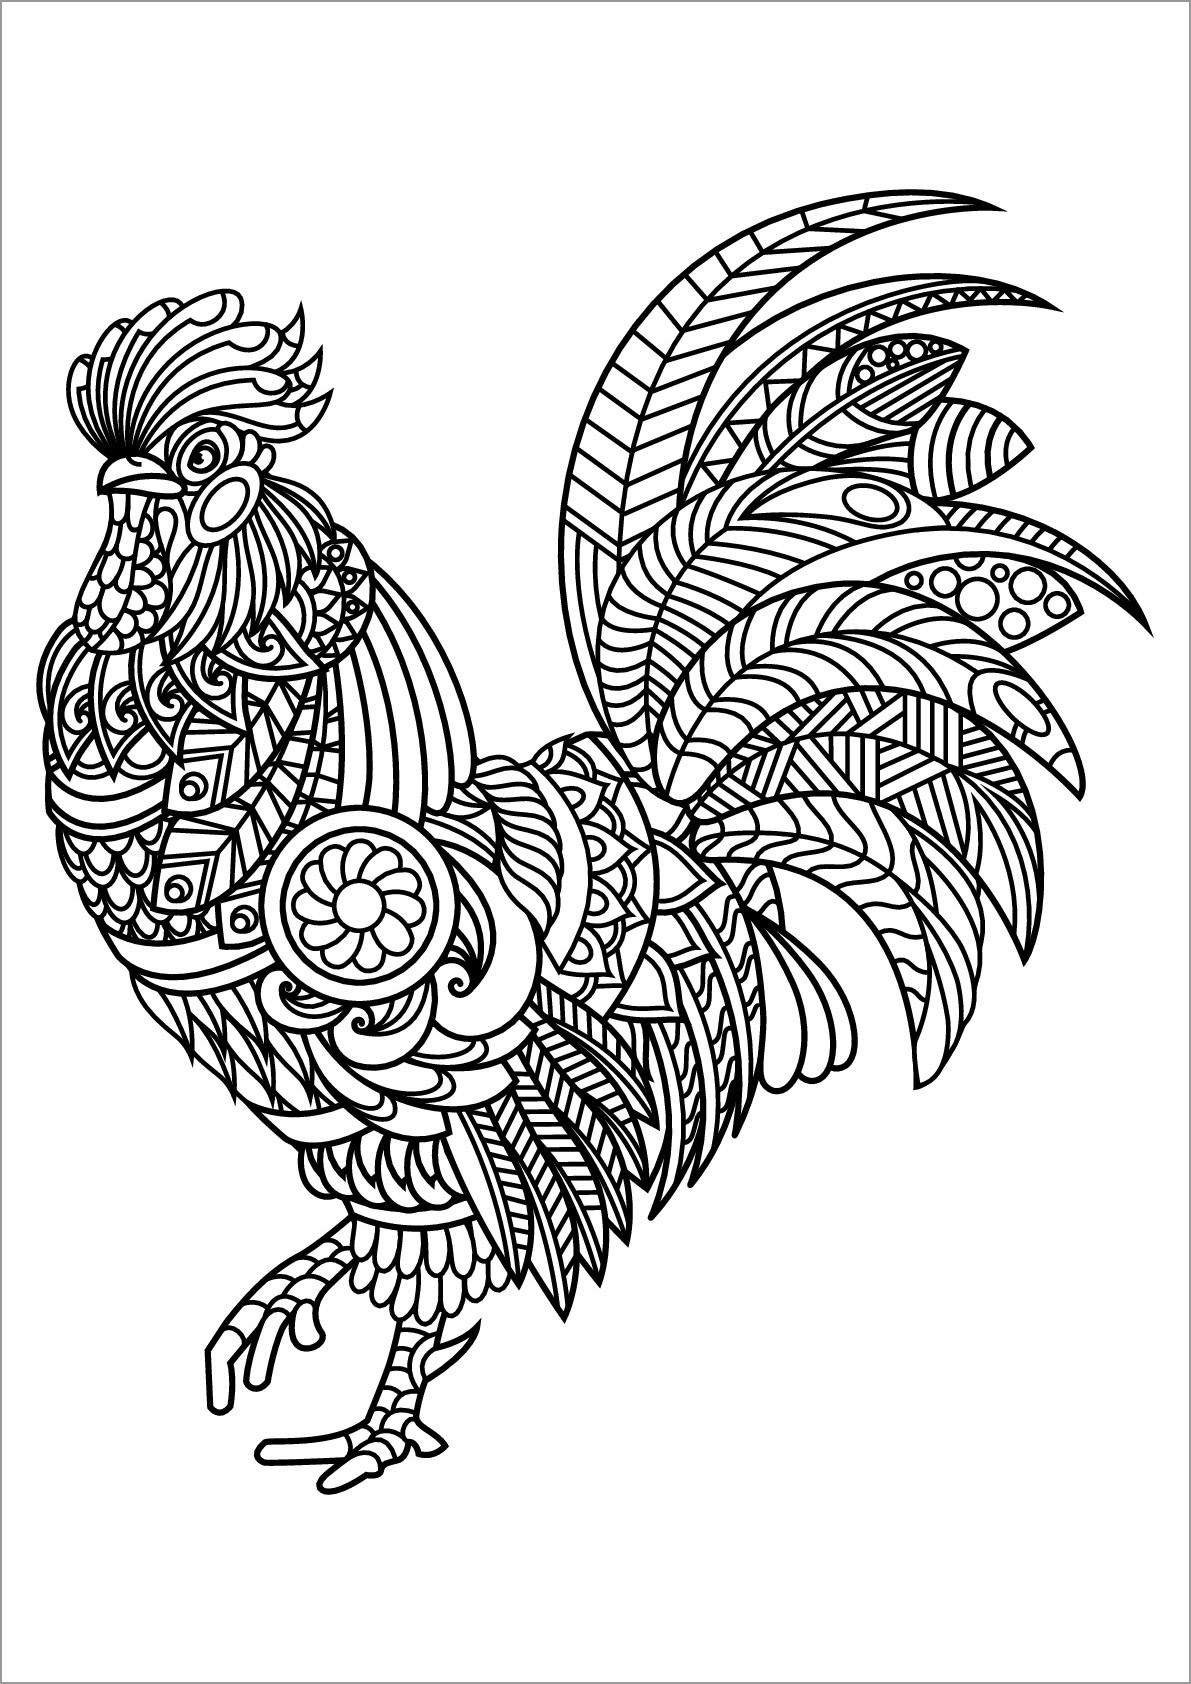 Zentangle Rooster Coloring Page for Adult